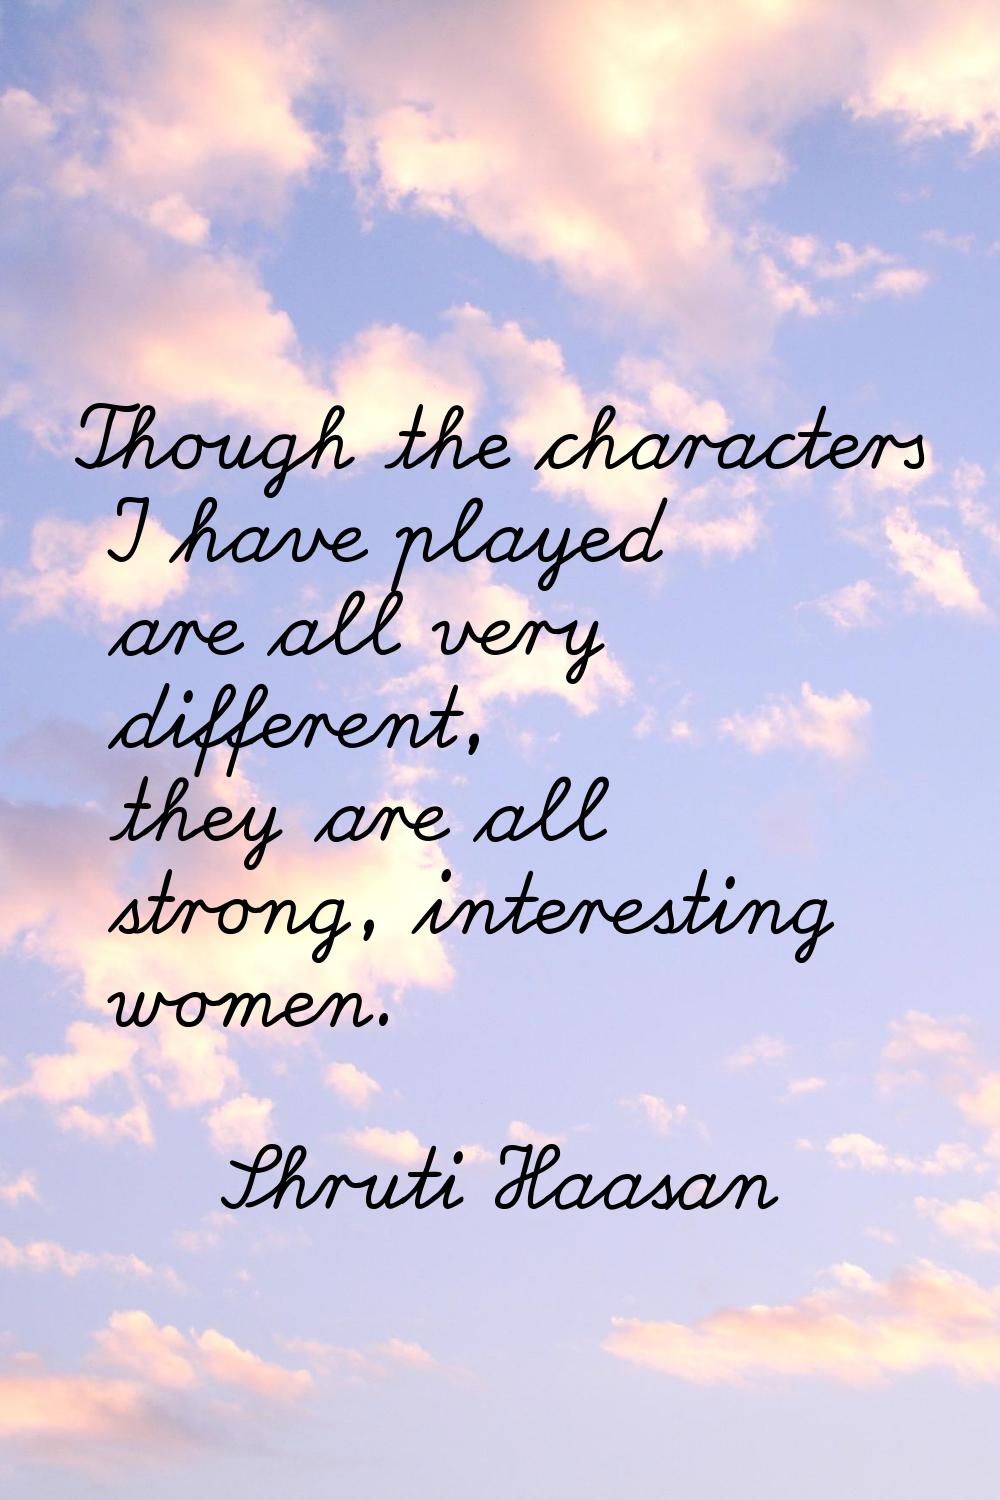 Though the characters I have played are all very different, they are all strong, interesting women.